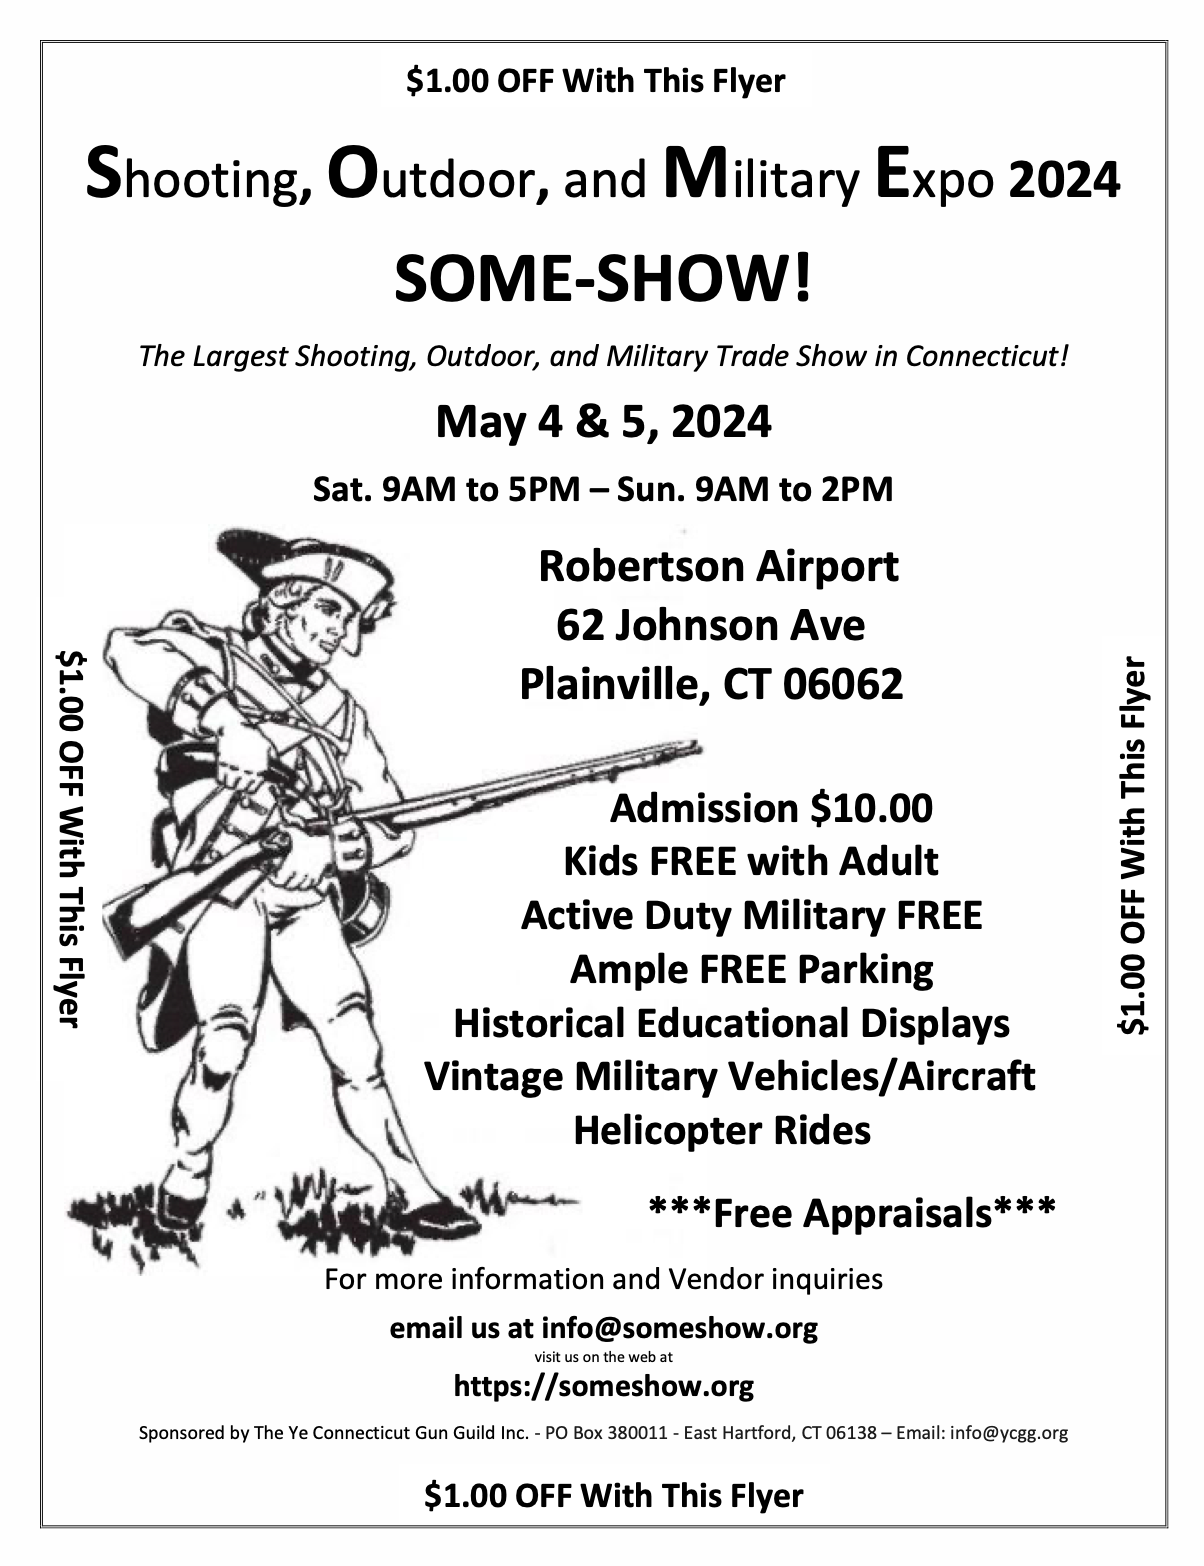 Shooting Outdoor and Military Expo 2024